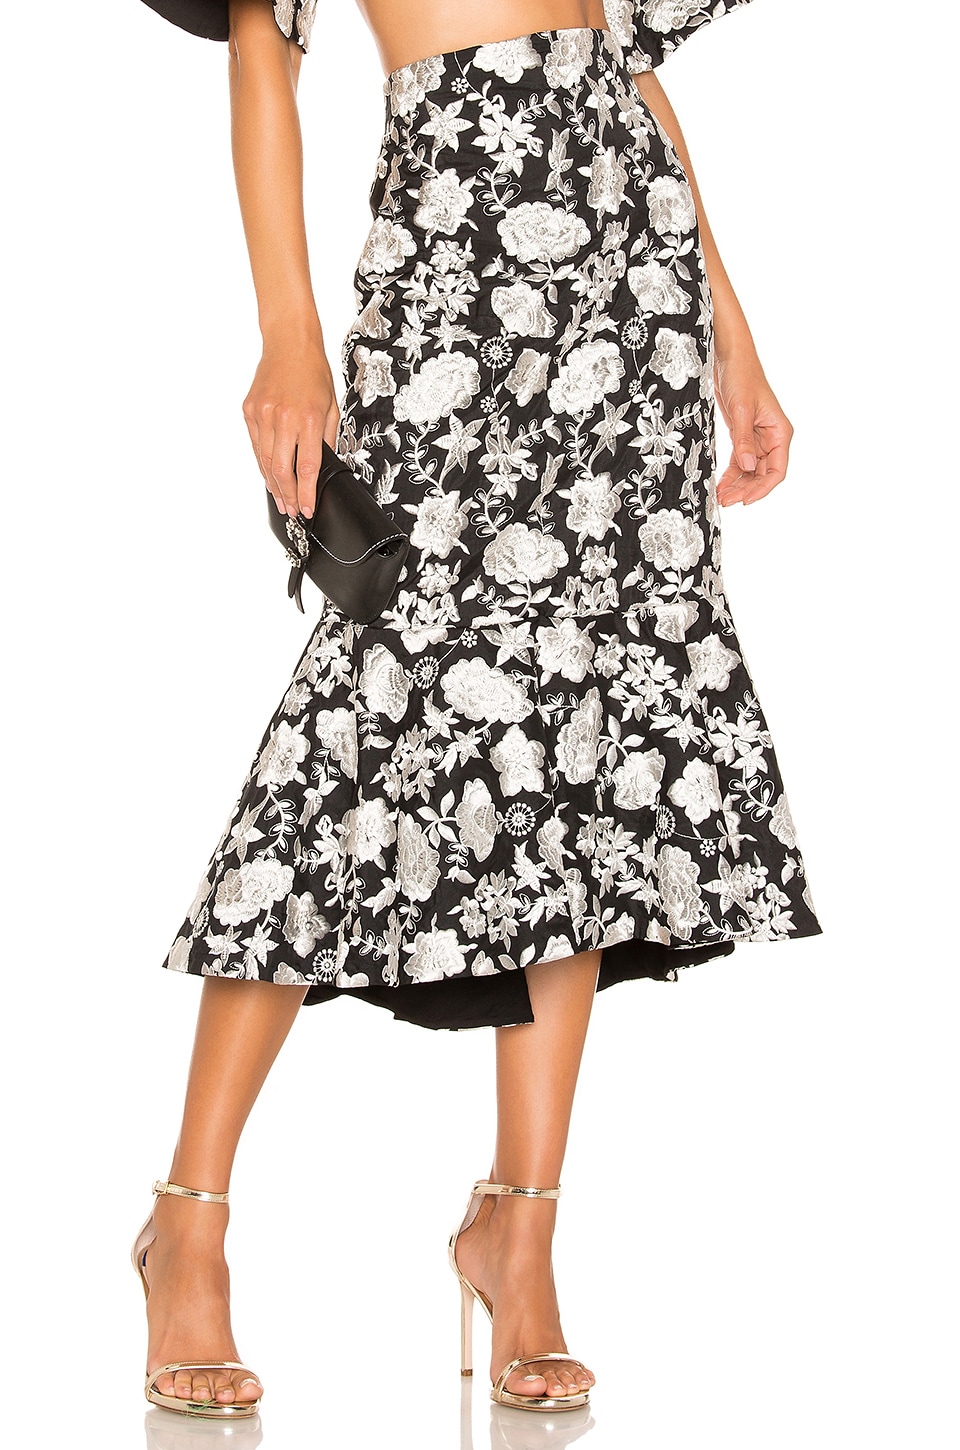 Alexis Reece Skirt in Ivory Floral Embroidery | REVOLVE